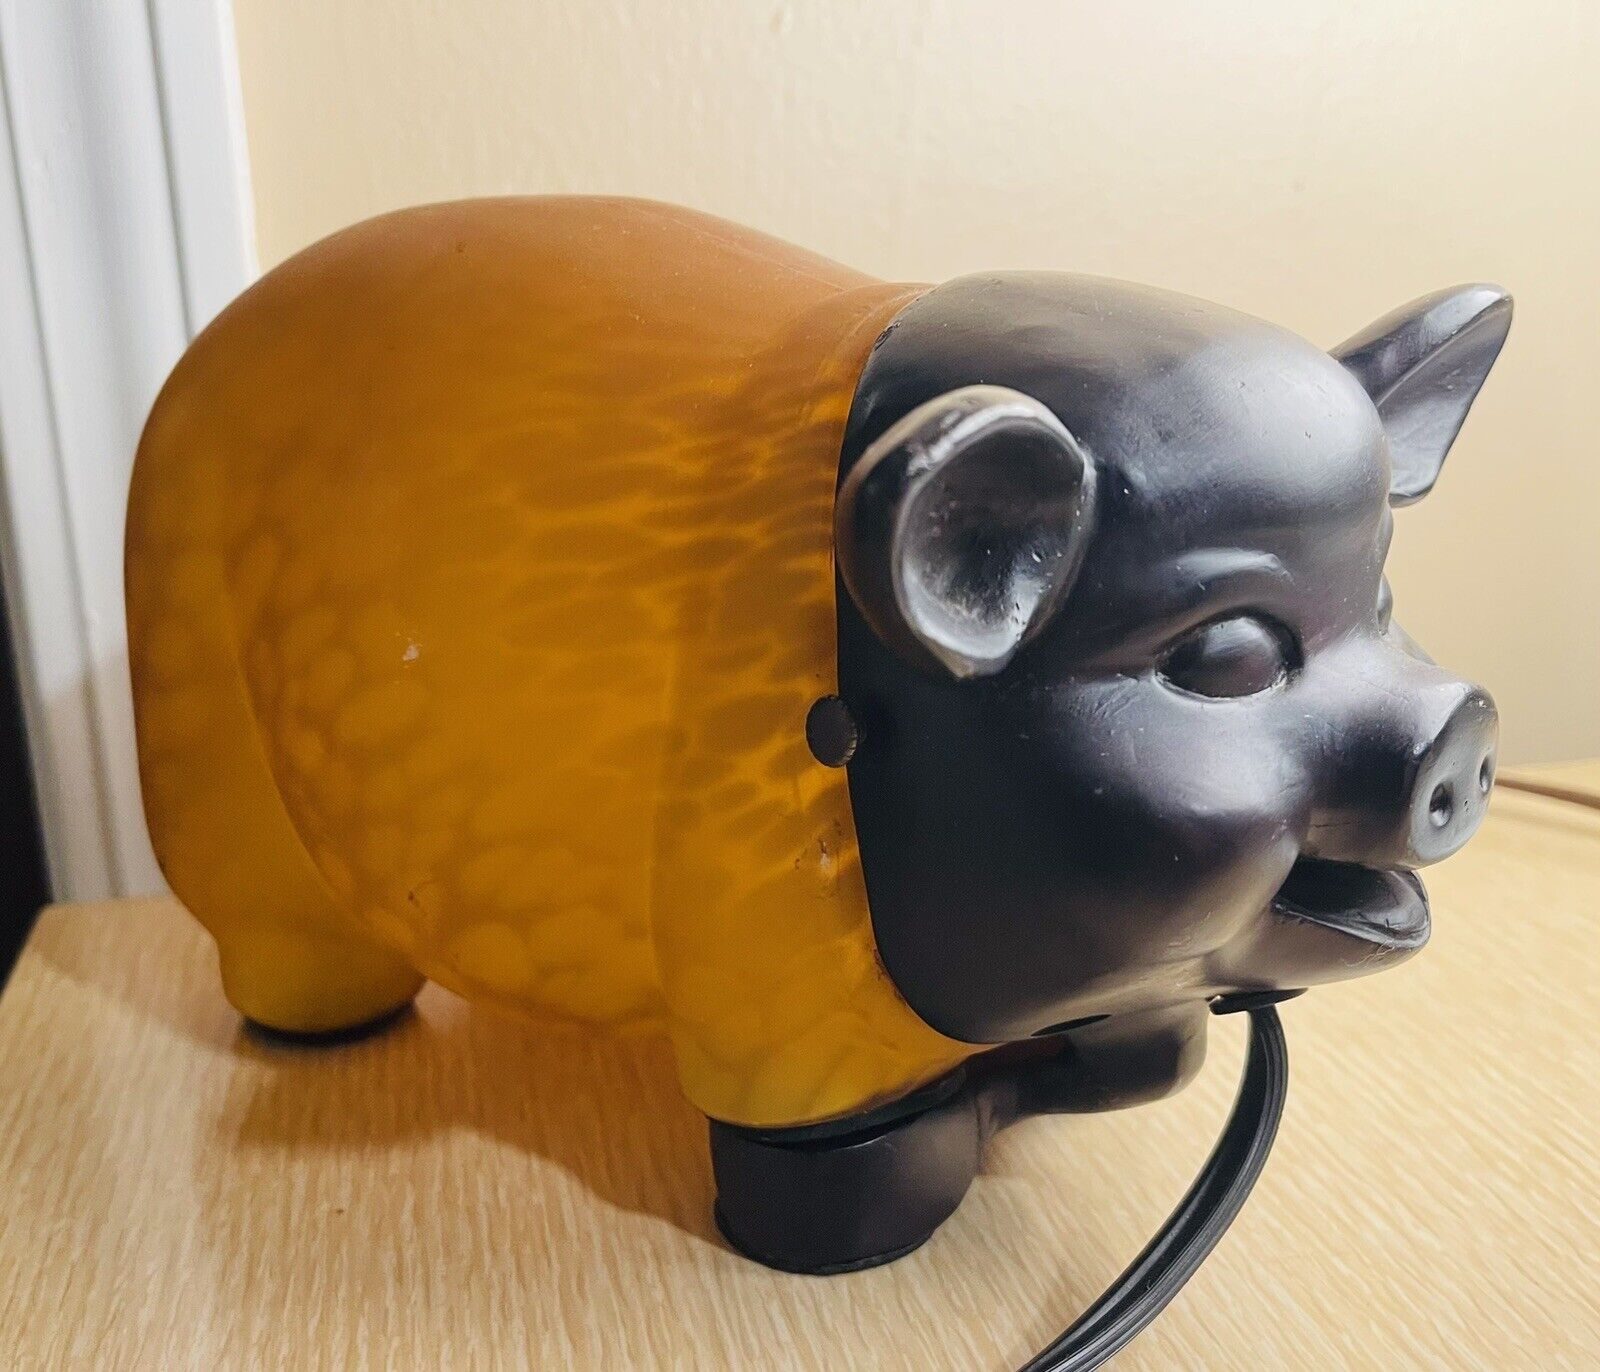 1980s Amber Glass and Metal Pig Figure Lamp Very Heavy Metal RARE